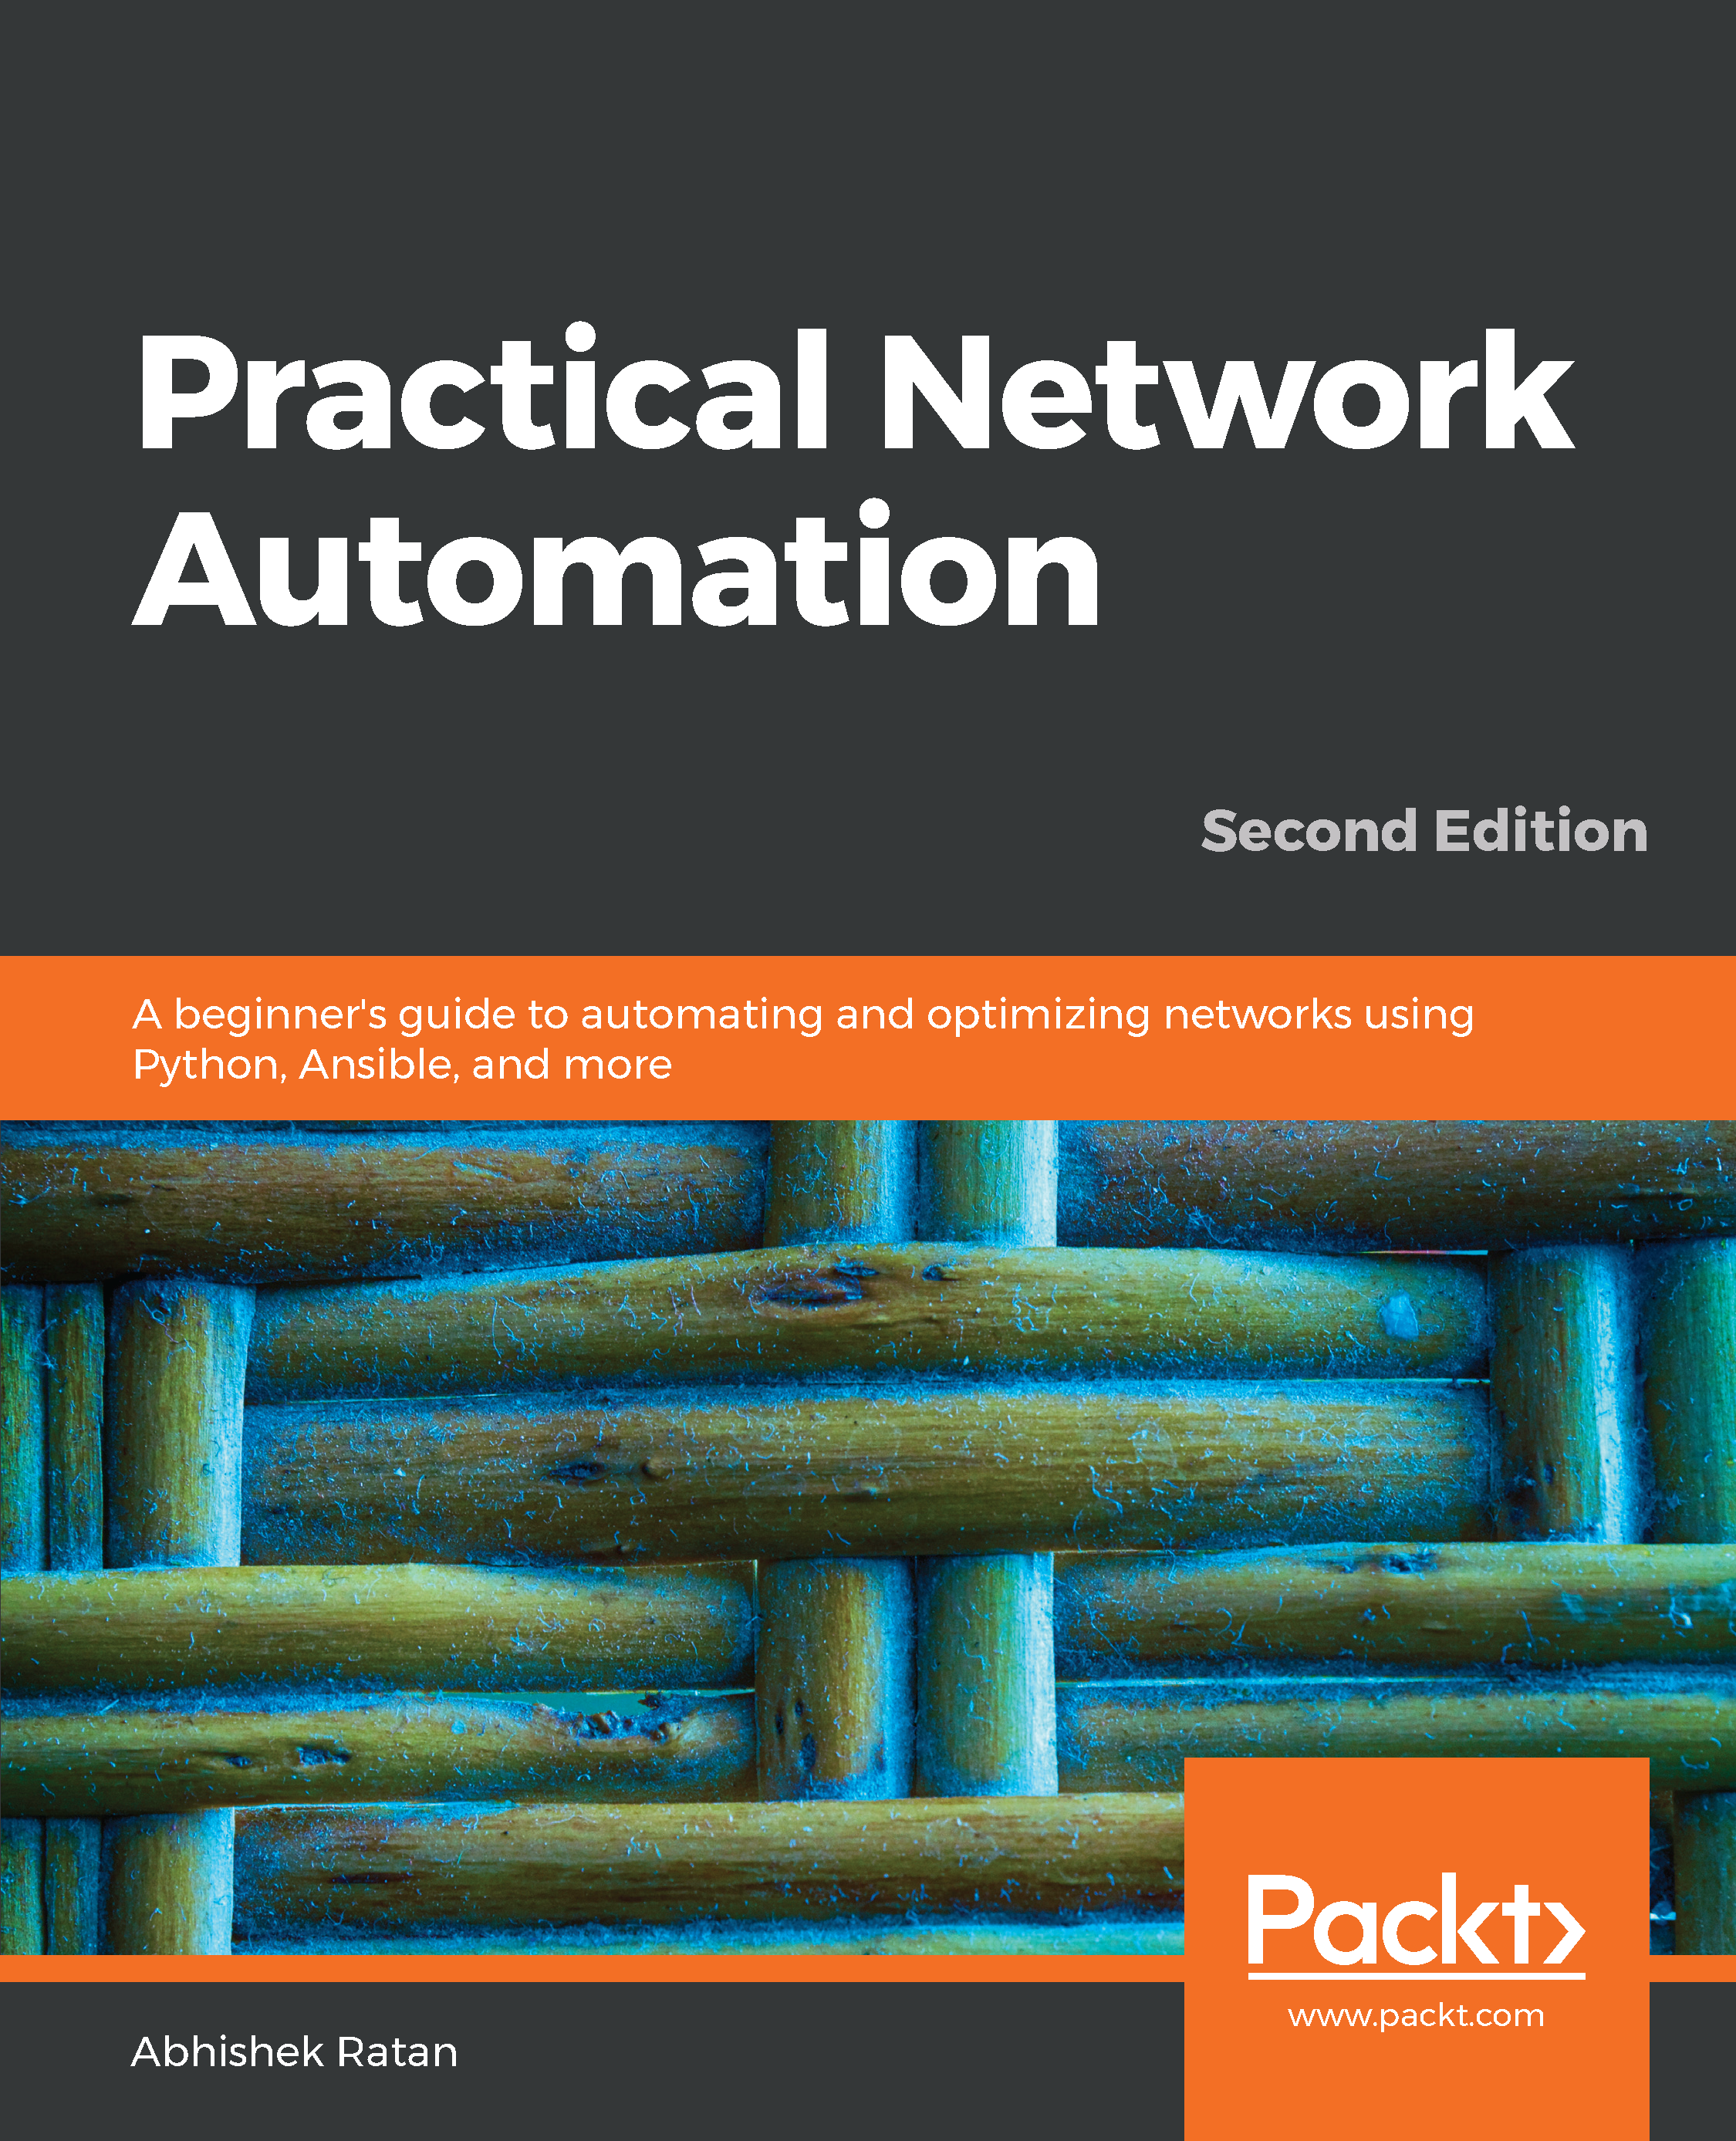 Practical Network Automation Second Edition